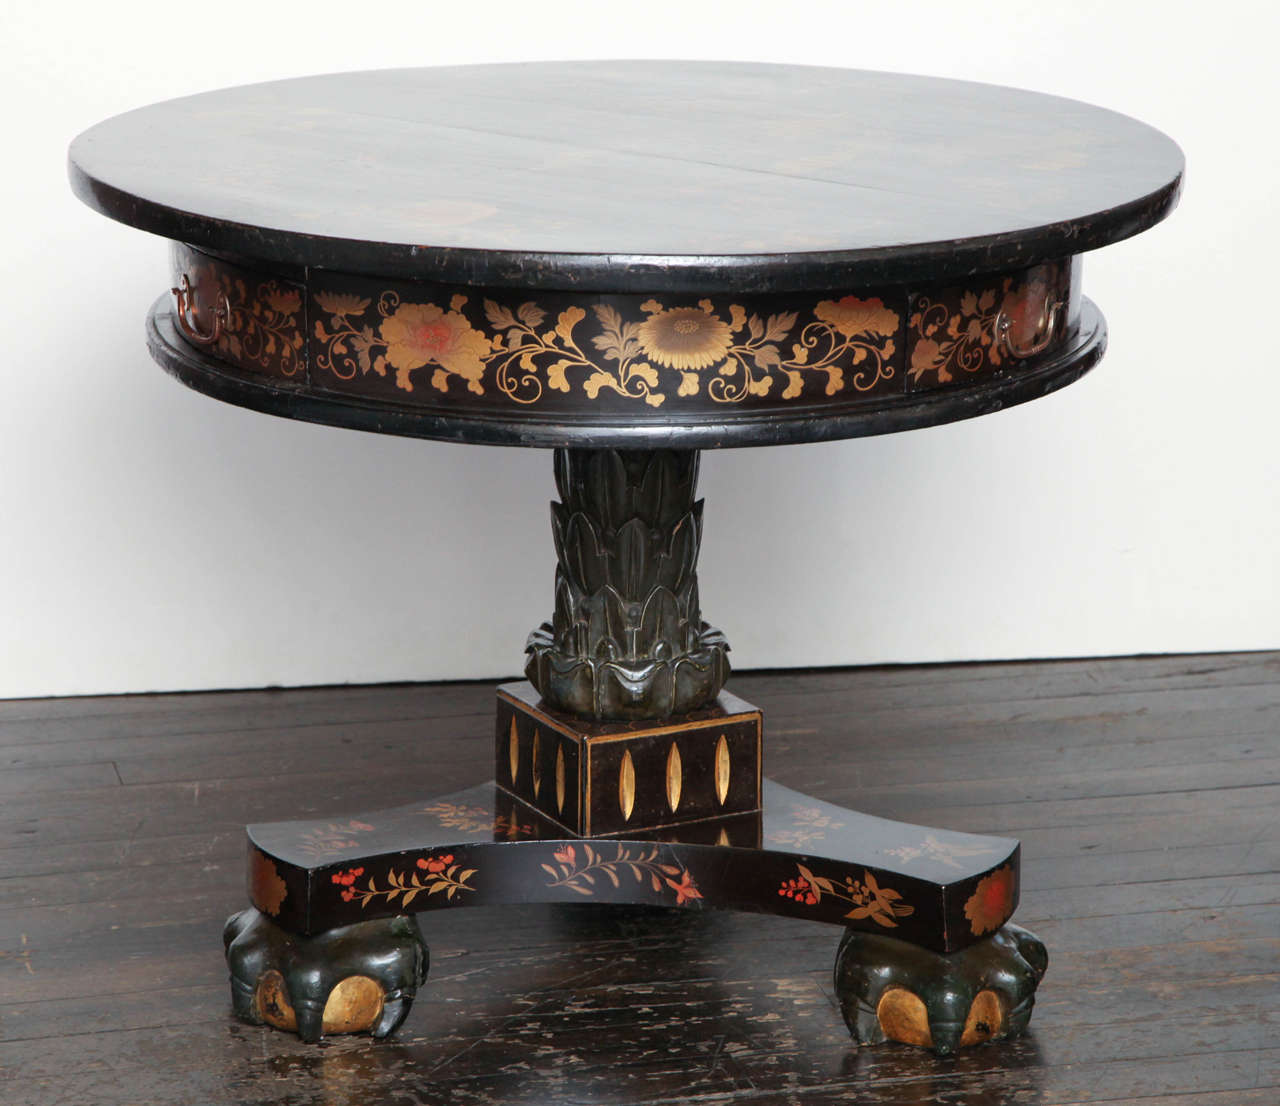 19th century Chinese lacquer drum table for the export market,
circa 1830-1840.